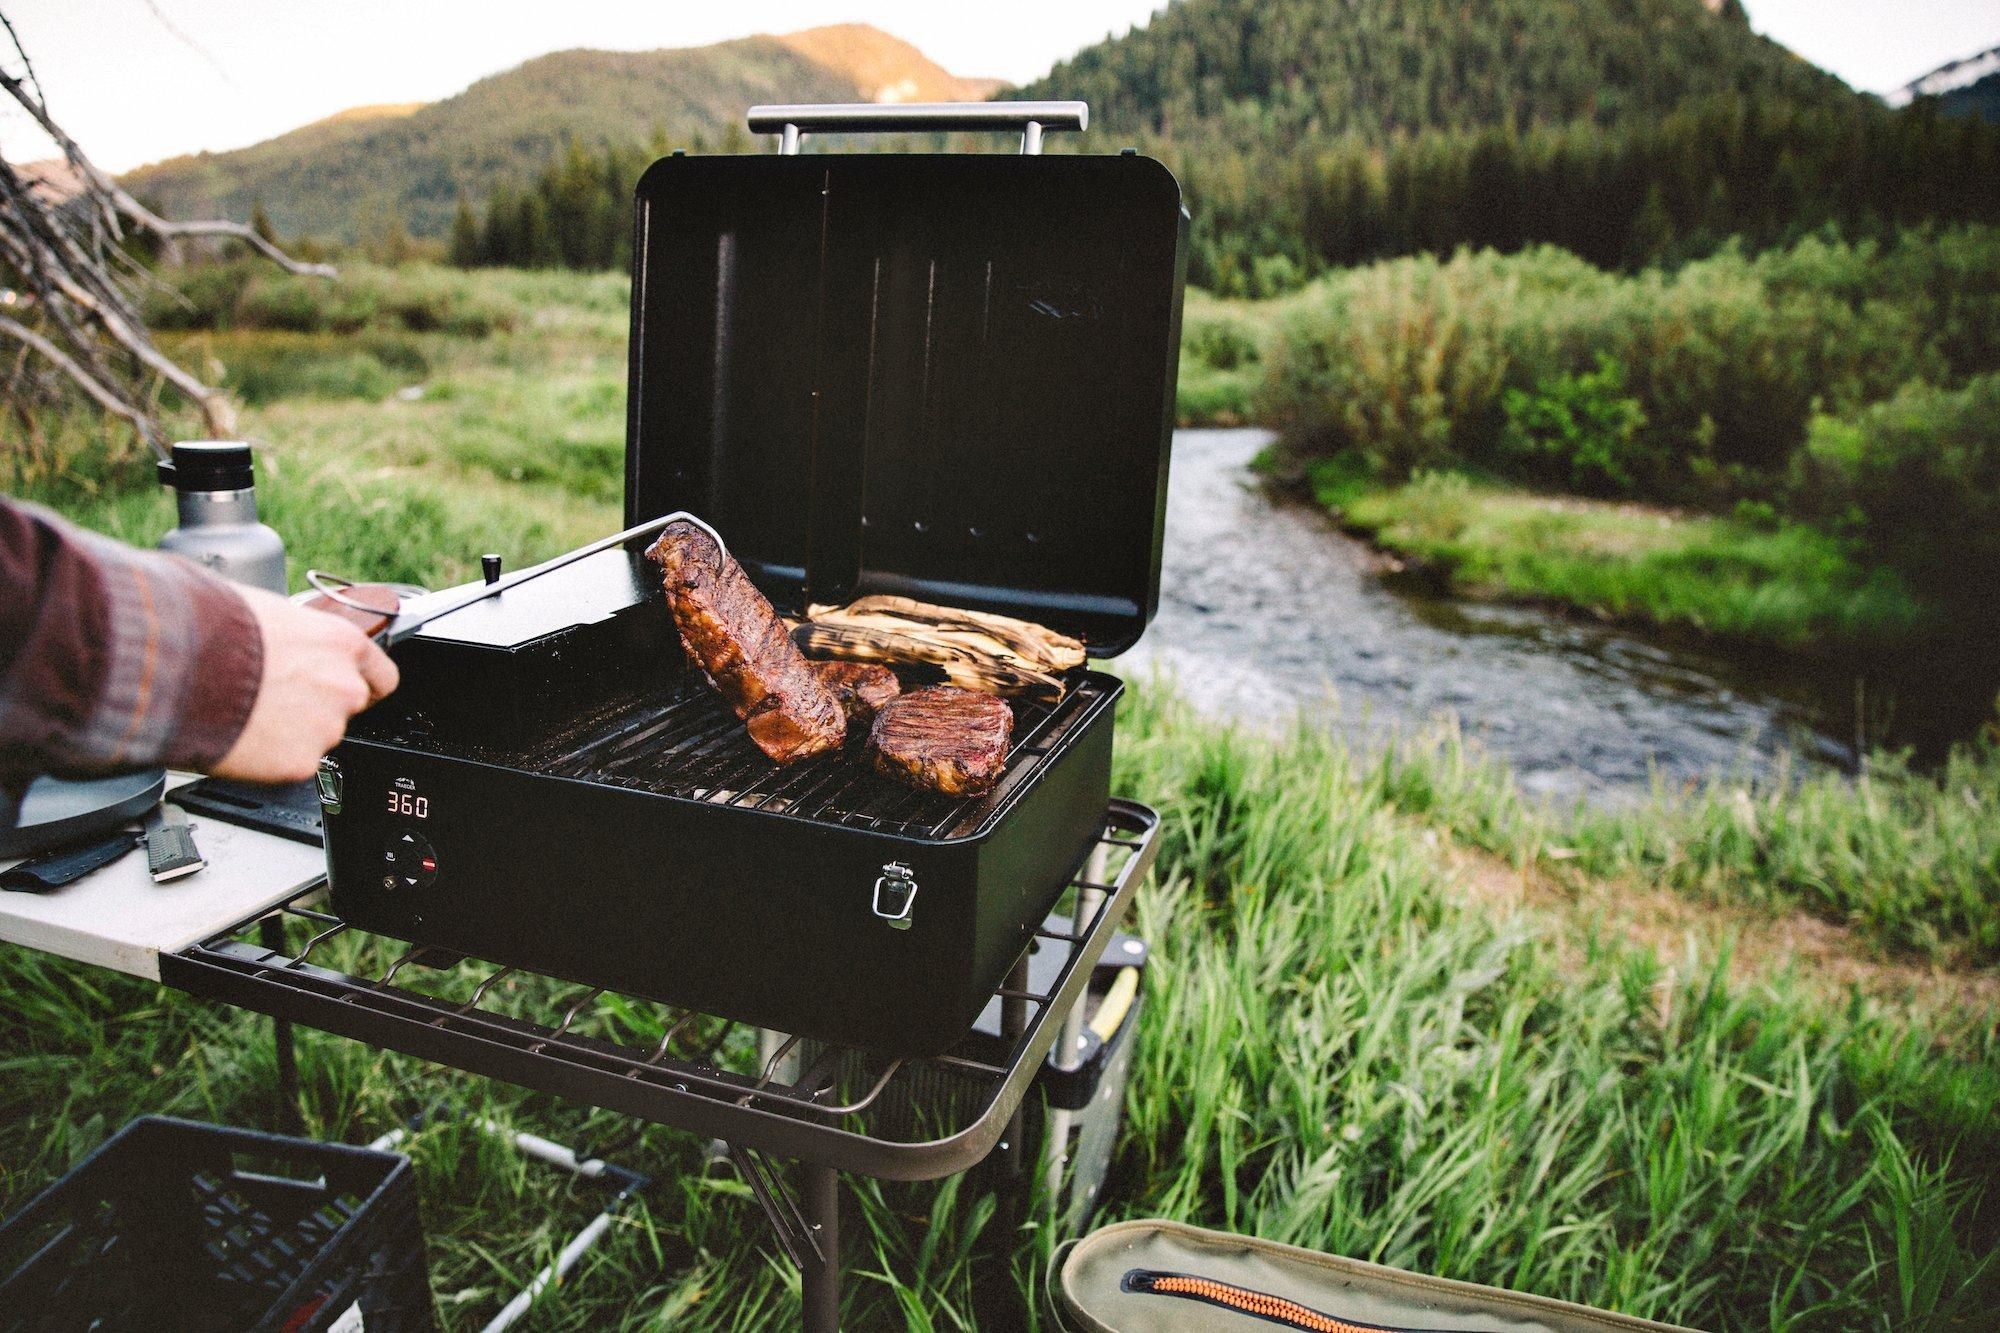 the portable grill set up next to a river and cooking steaks